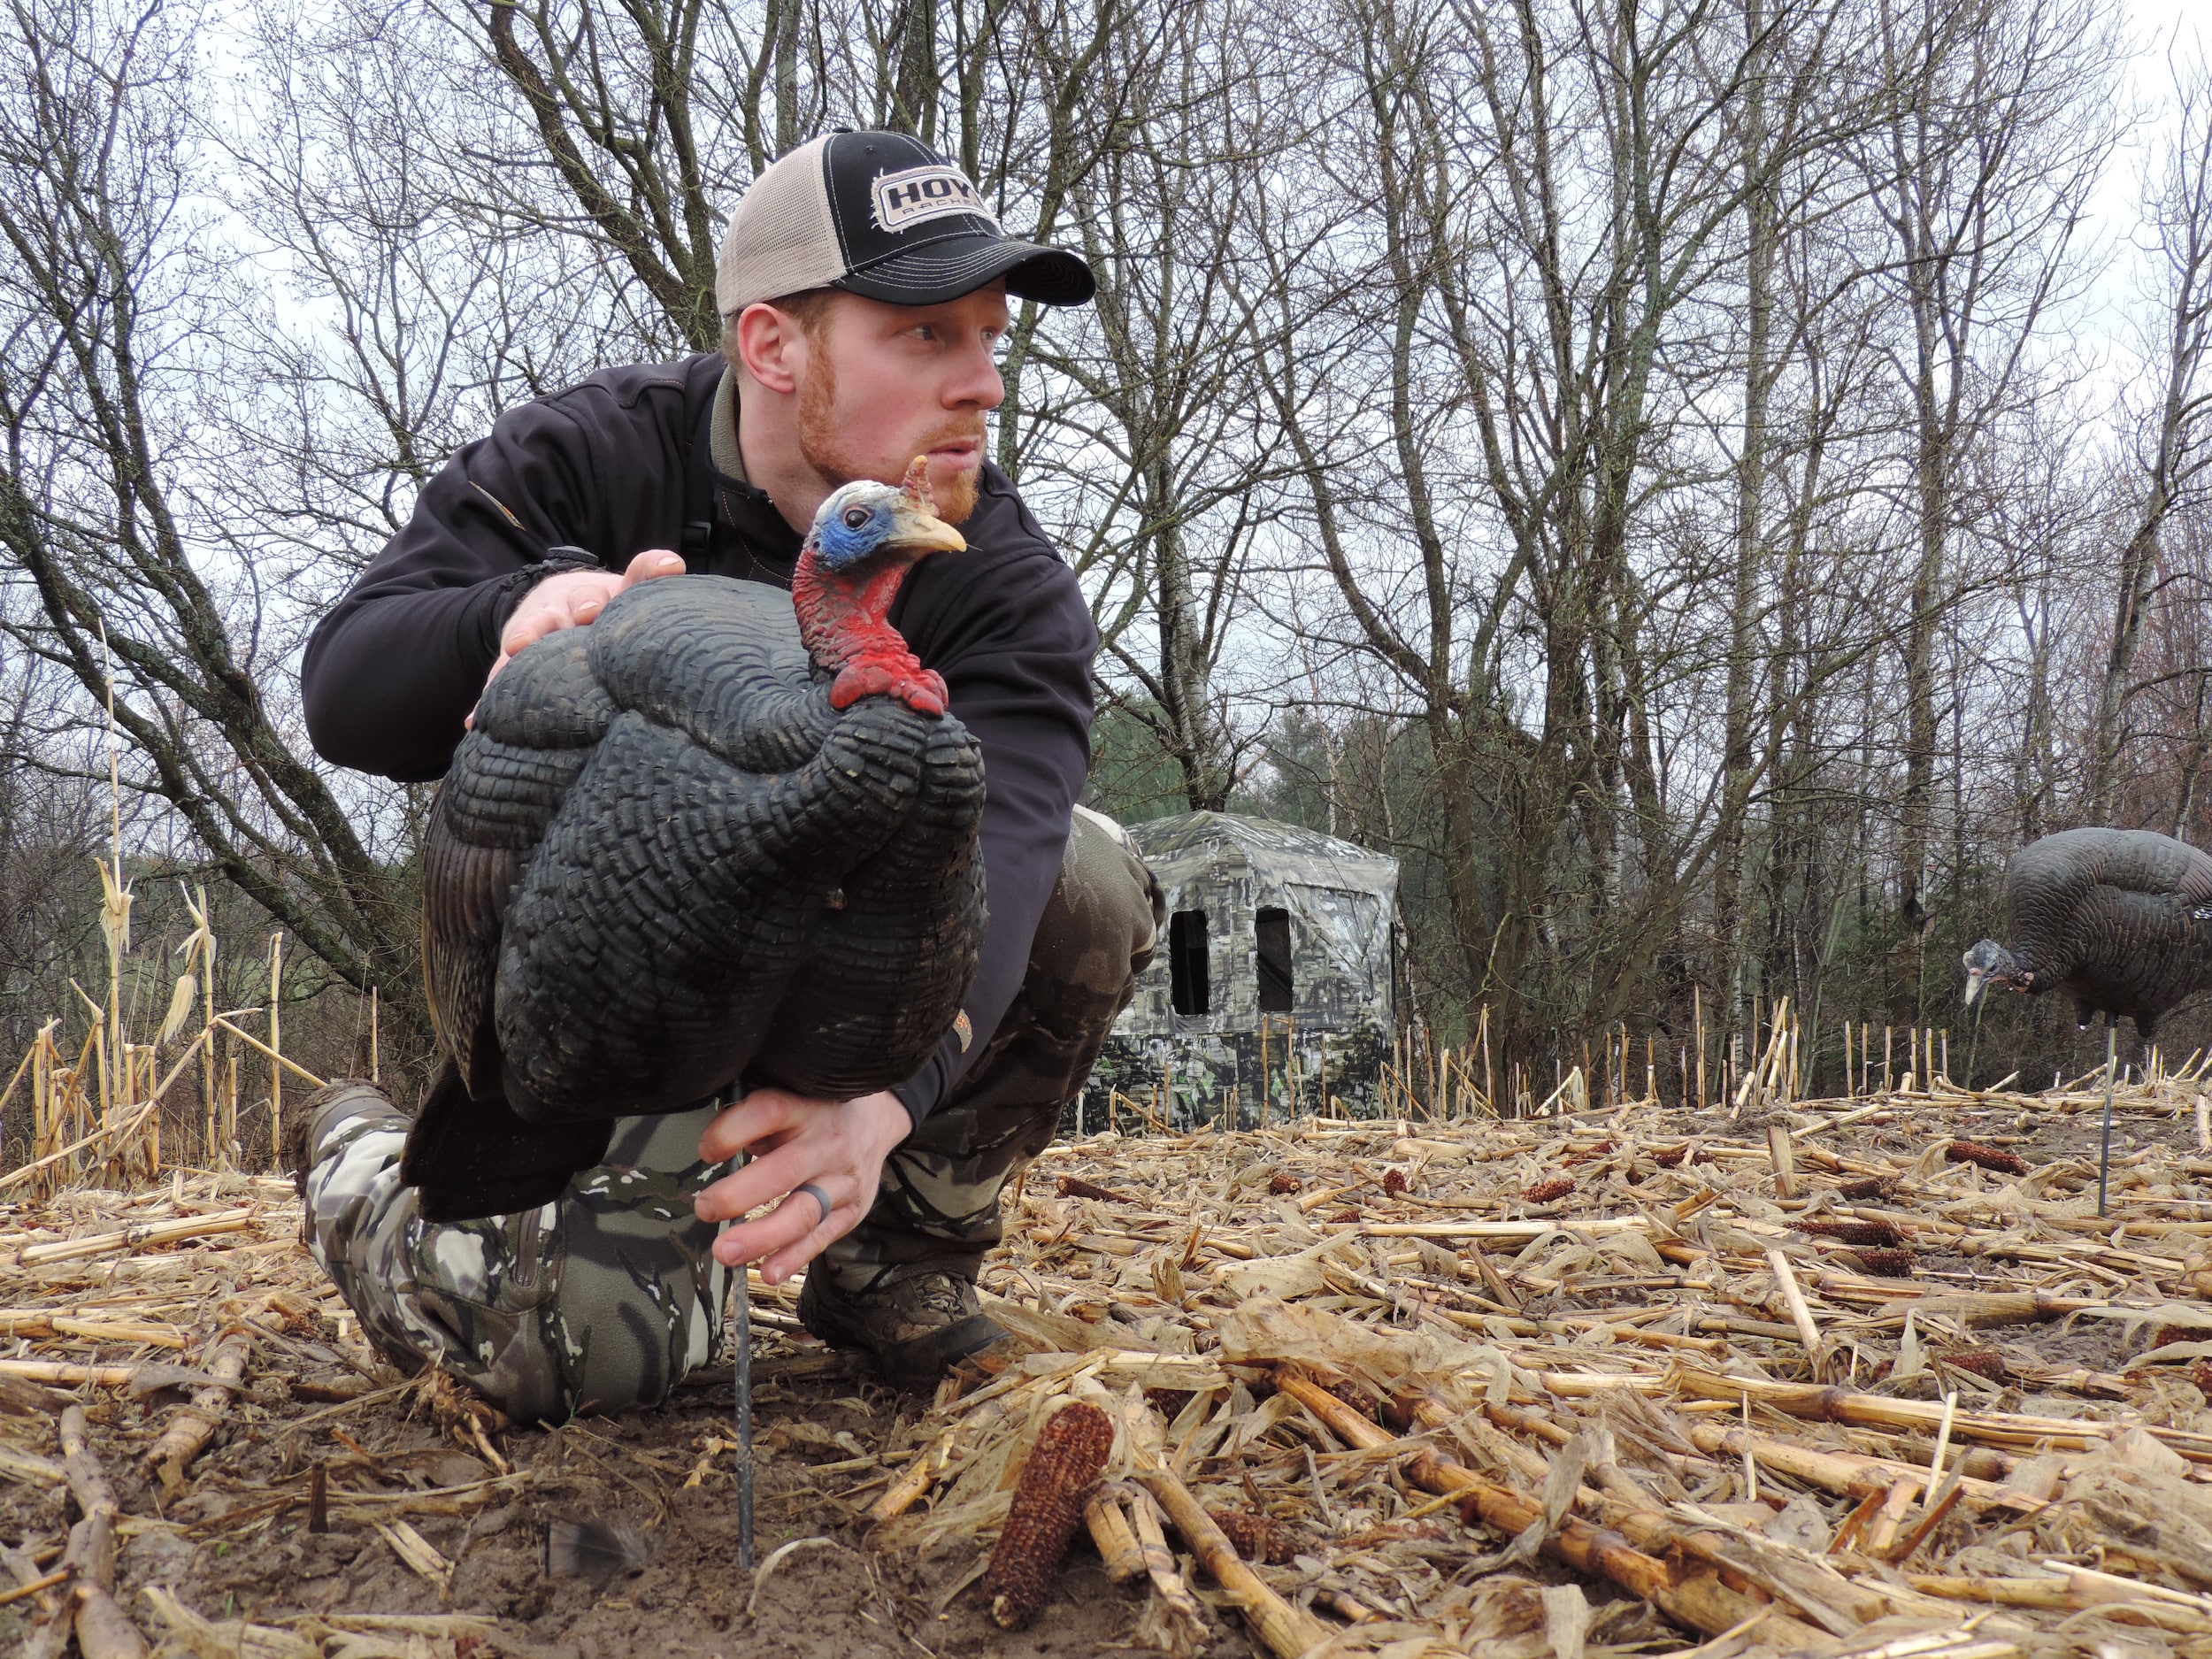 Realistic decoys not only bring toms in, but keeps them focused, which allows you to draw a bow undetected.